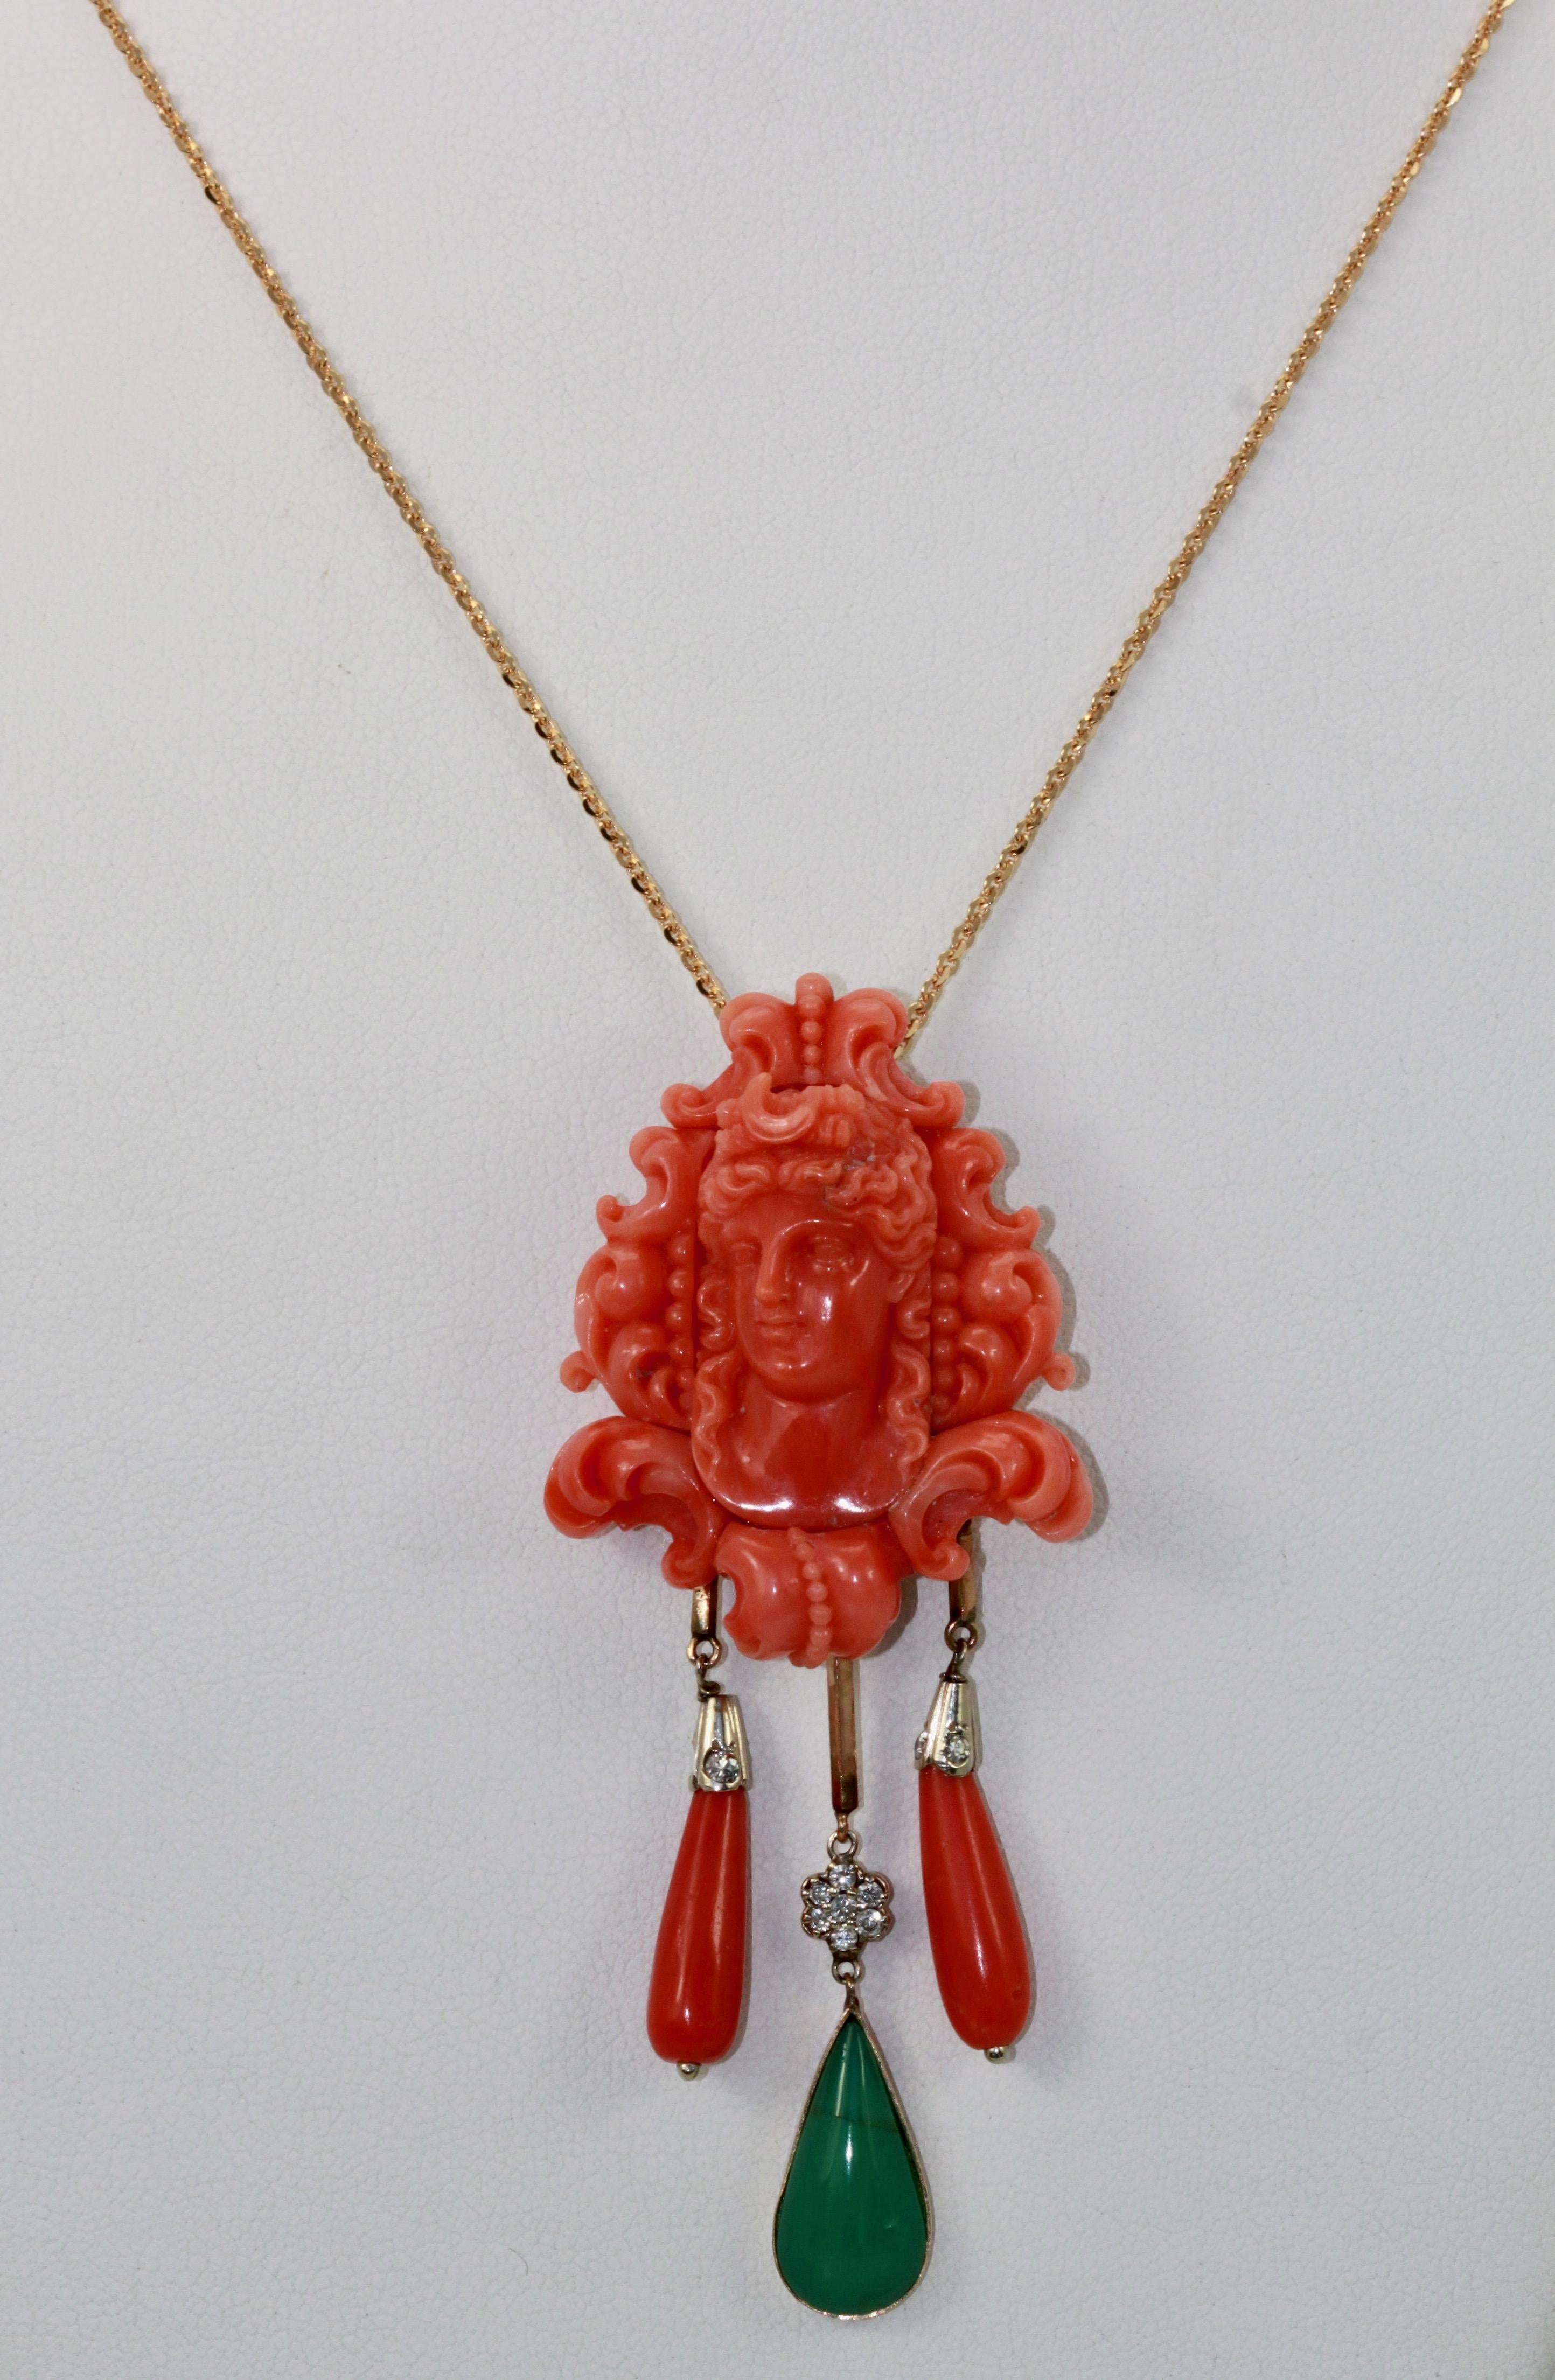 Carved Coral Brooch Pendant W/ Coral Drops and Crystophase Drop For Sale 3